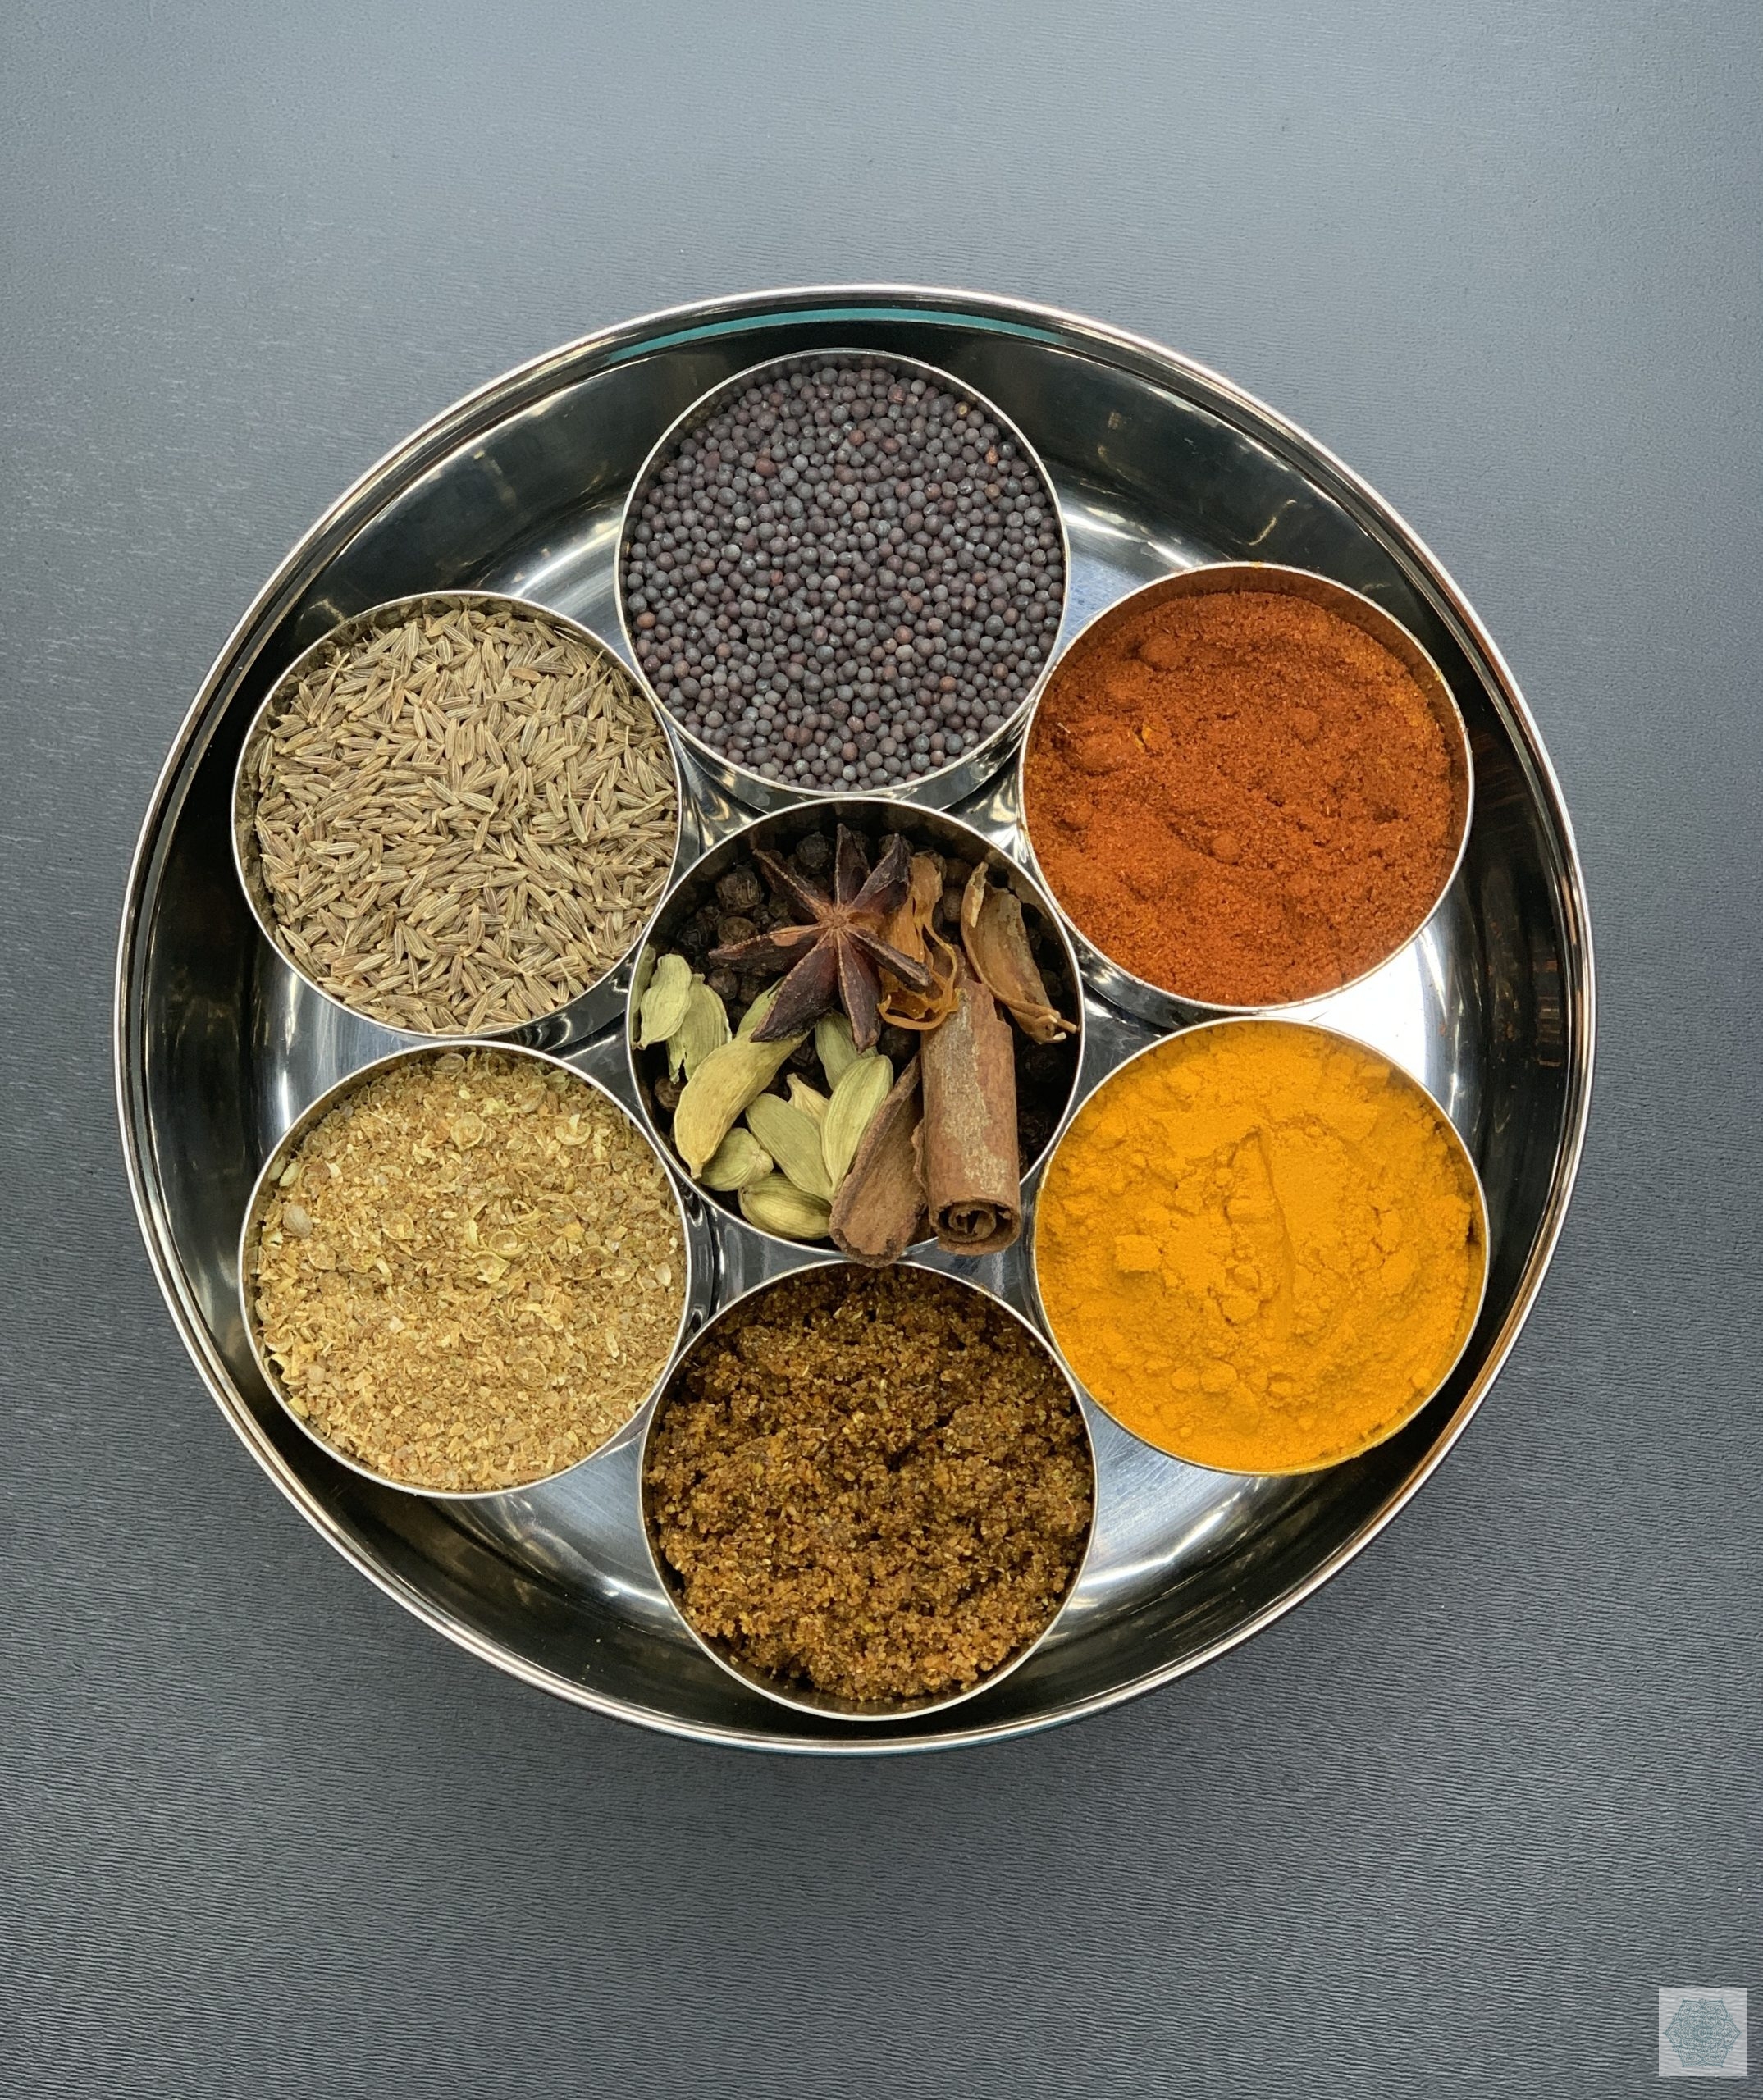 A typical Spice Box (masala dabba) in Indian Households